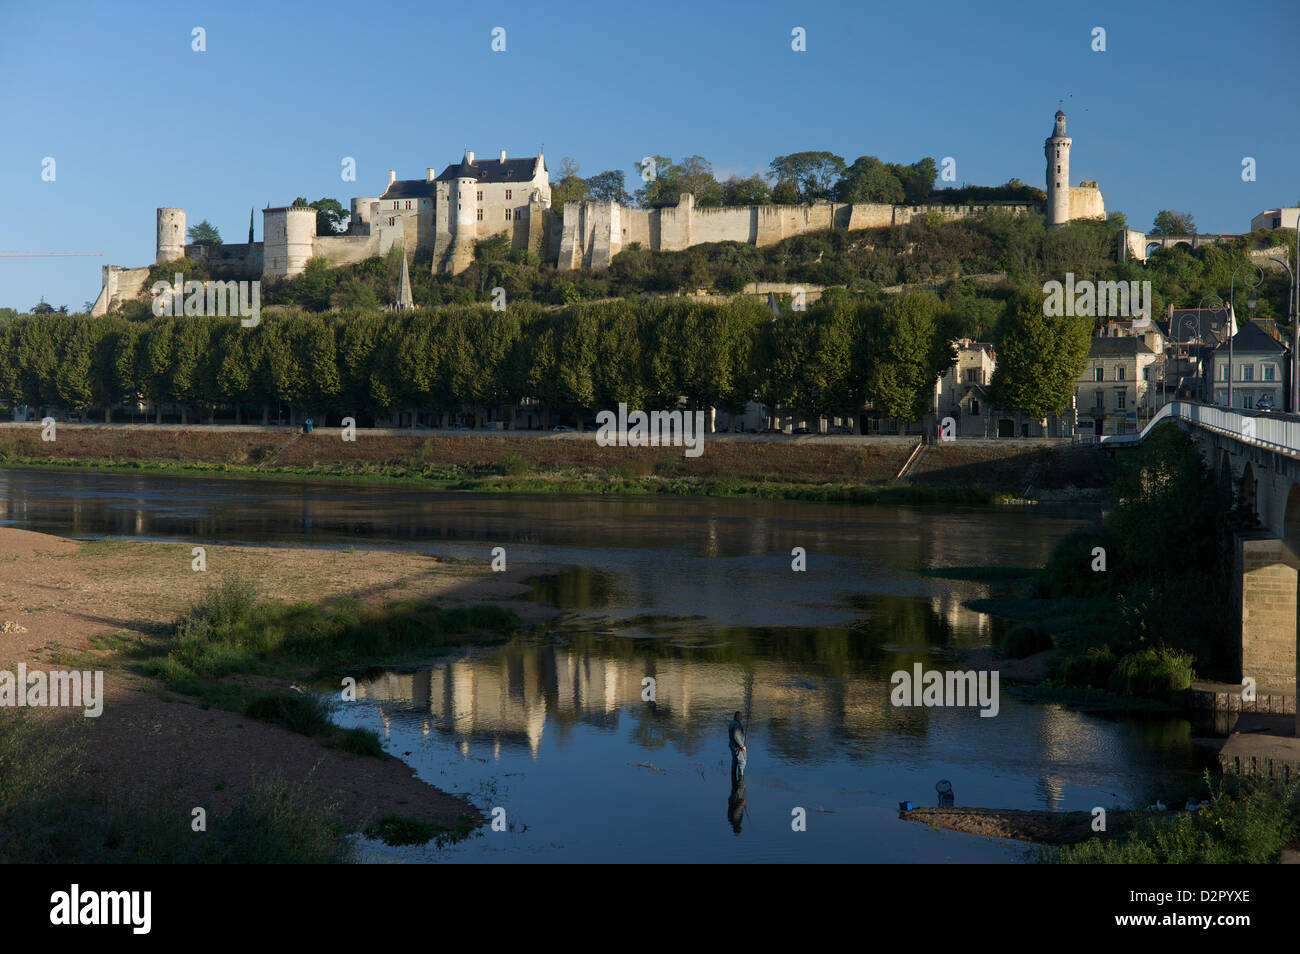 Chateau and River Vienne, Chinon, Indre-et-Loire, Touraine, France, Europe Stock Photo